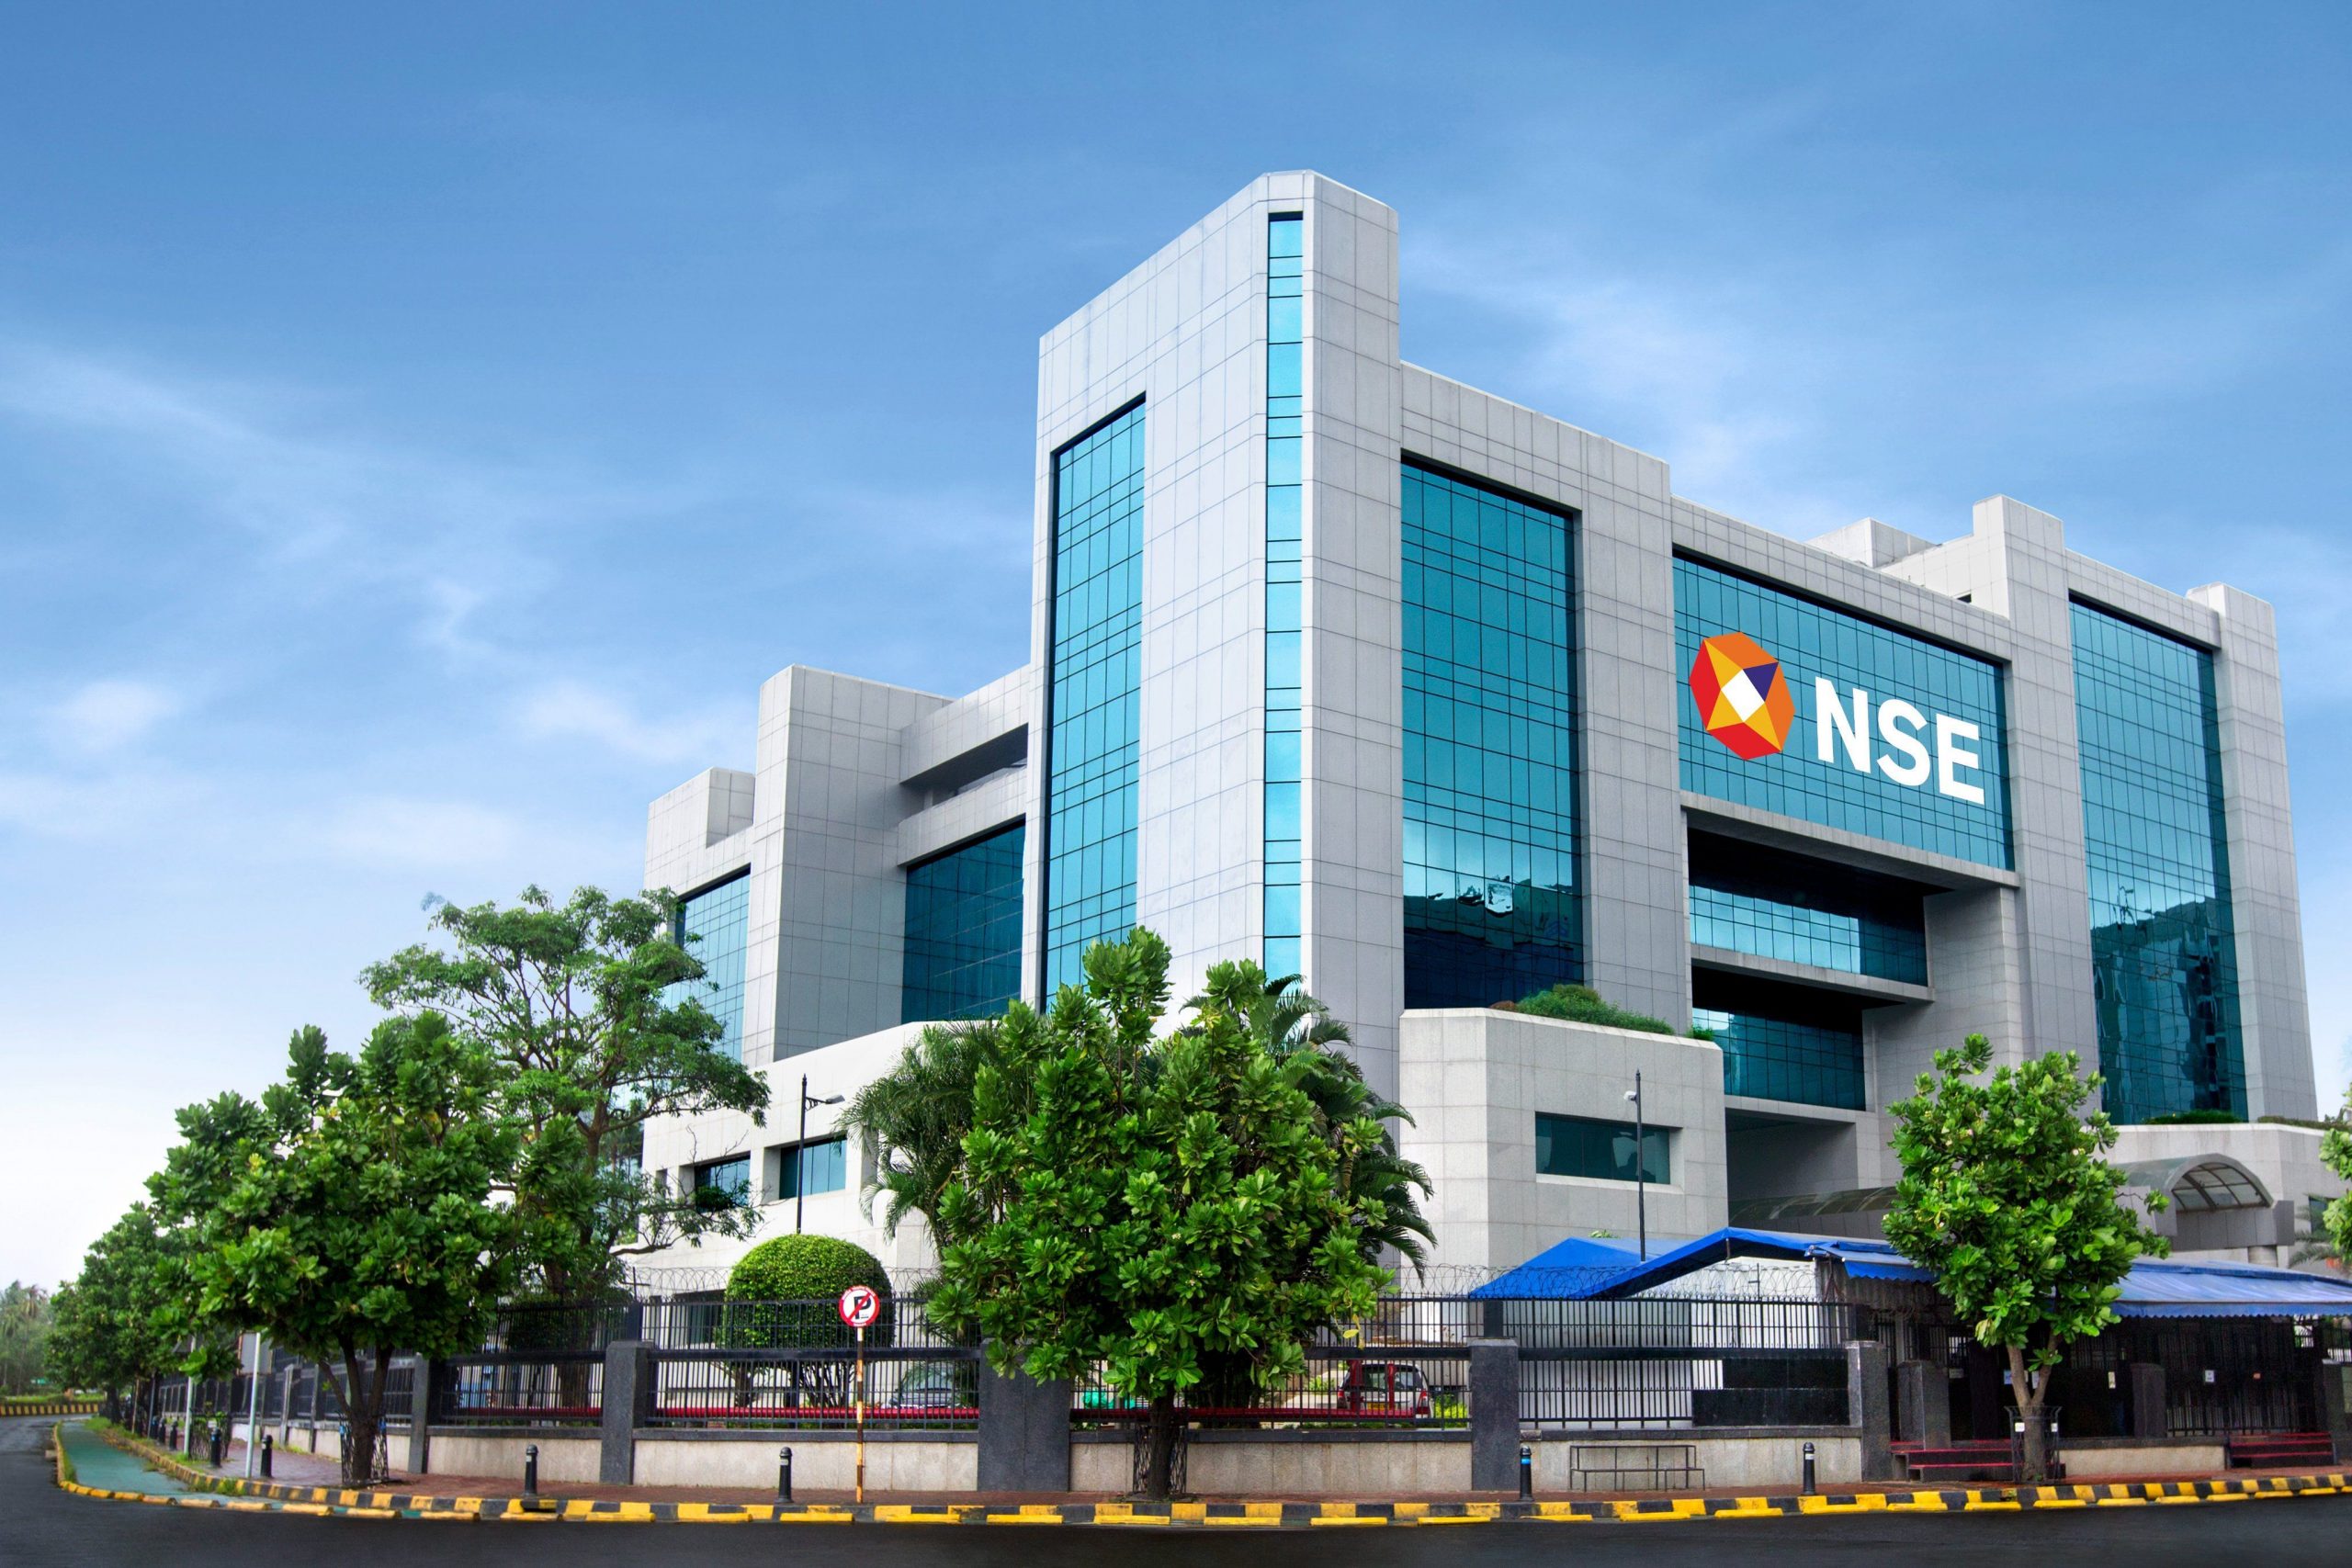 NSE F&O Ban: RBL Bank is under ban on Thursday, August 25, 2022